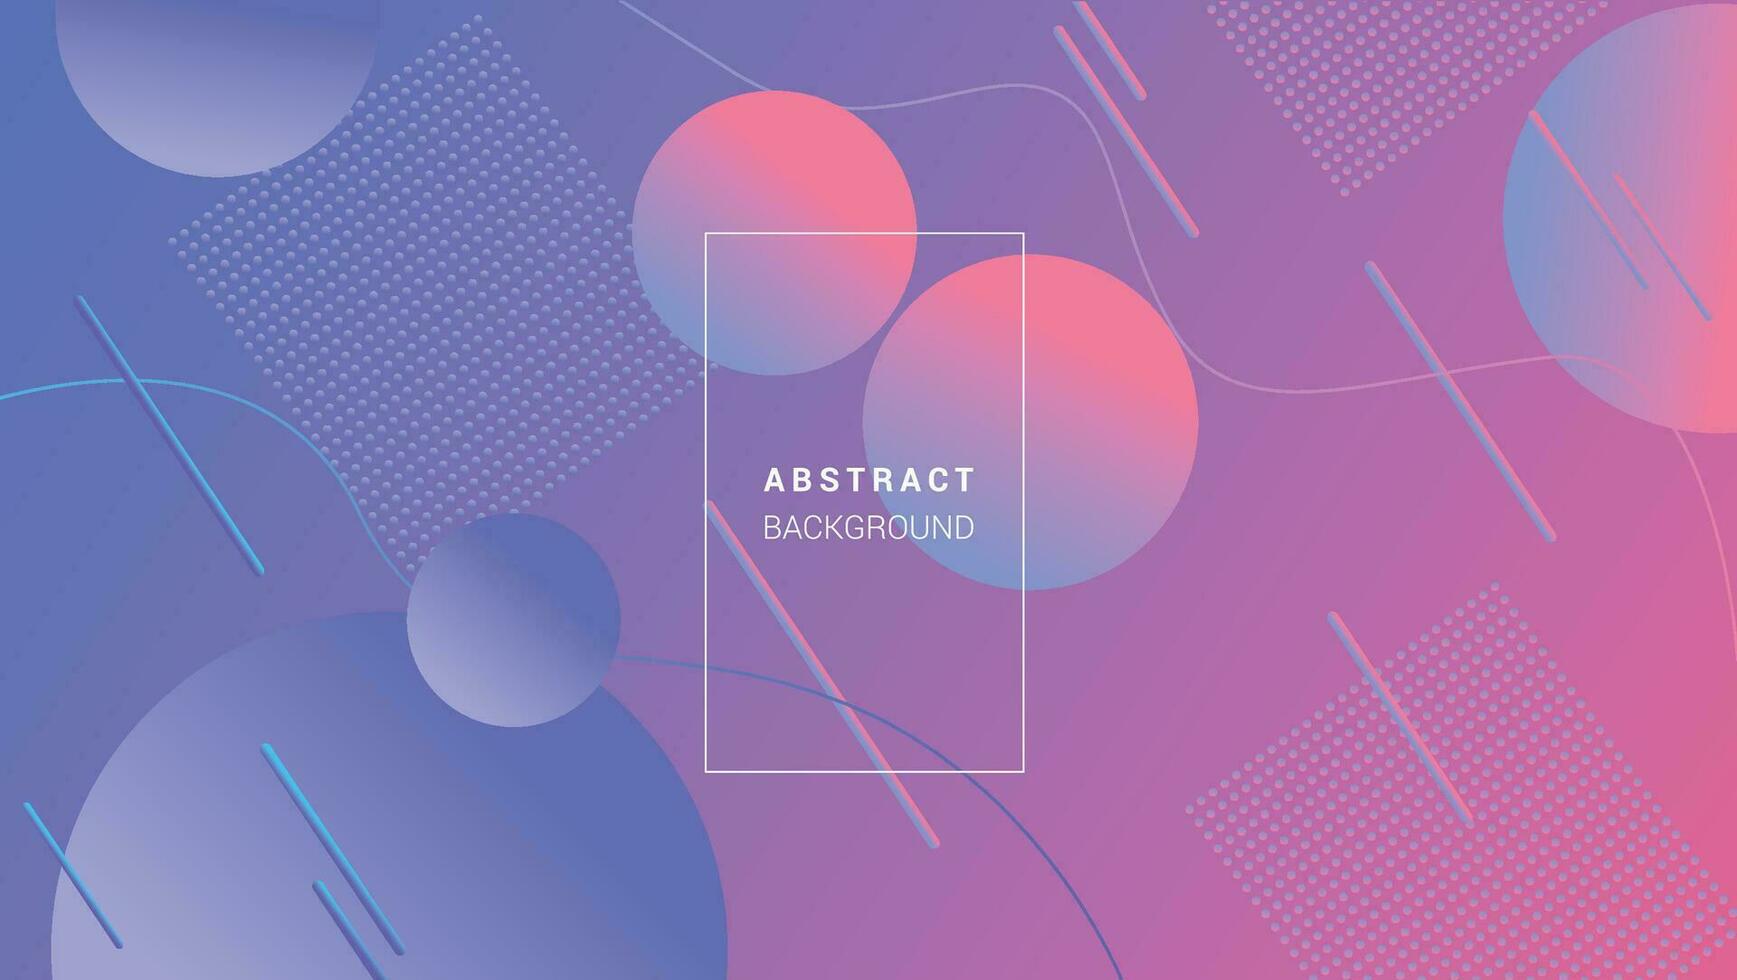 Abstract background with geometric, modern bright colorful gradient. Pink and blue pattern design banner. Dynamic light space backdrop. Vector illustration EPS 10.